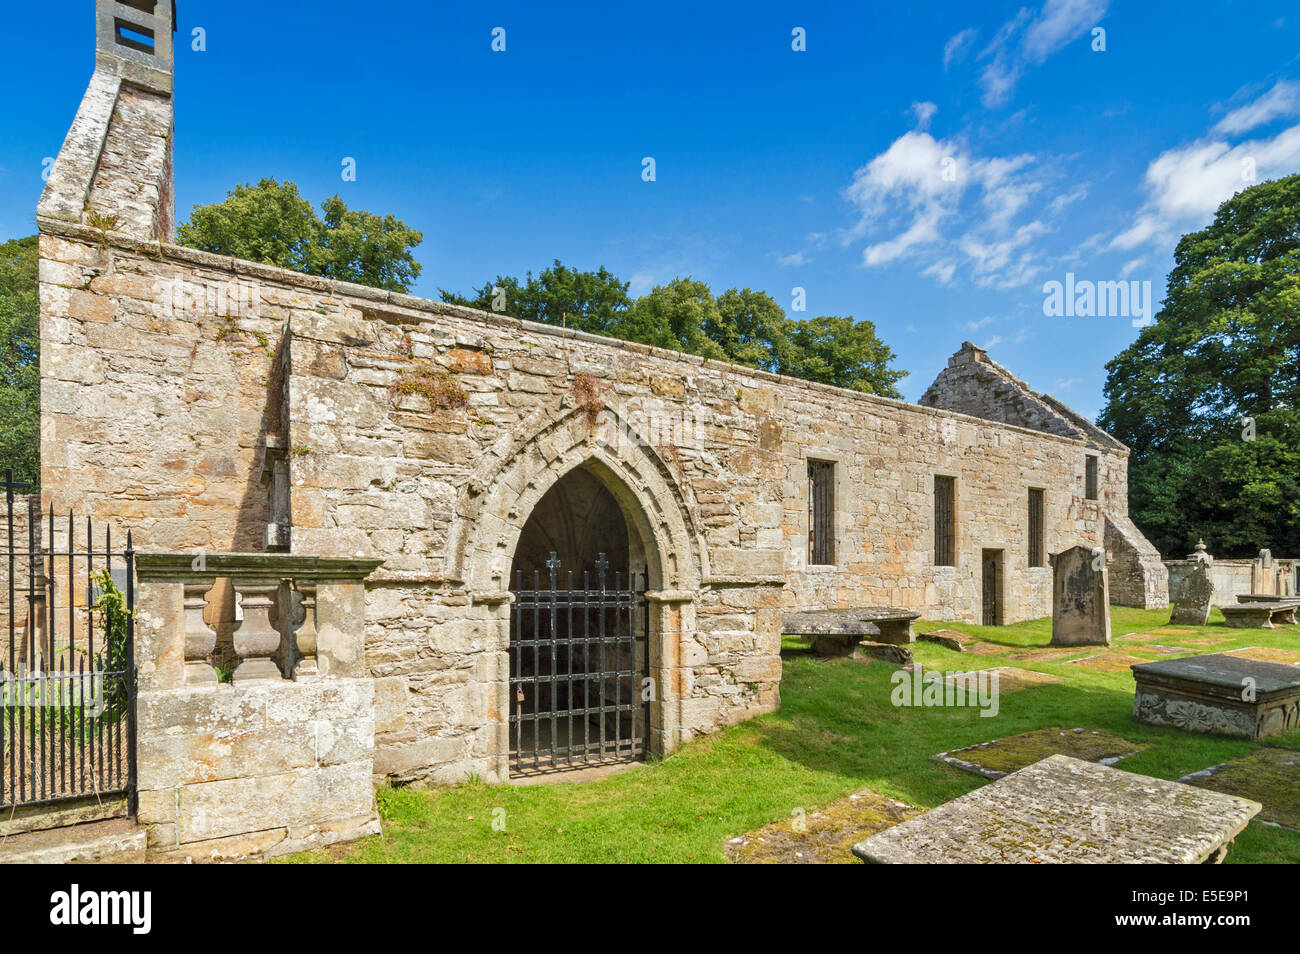 ST PETER'S KIRK OR CHURCH DUFFUS MORAY THE PORCH AND HIGHLY DECORATED ARCH Stock Photo